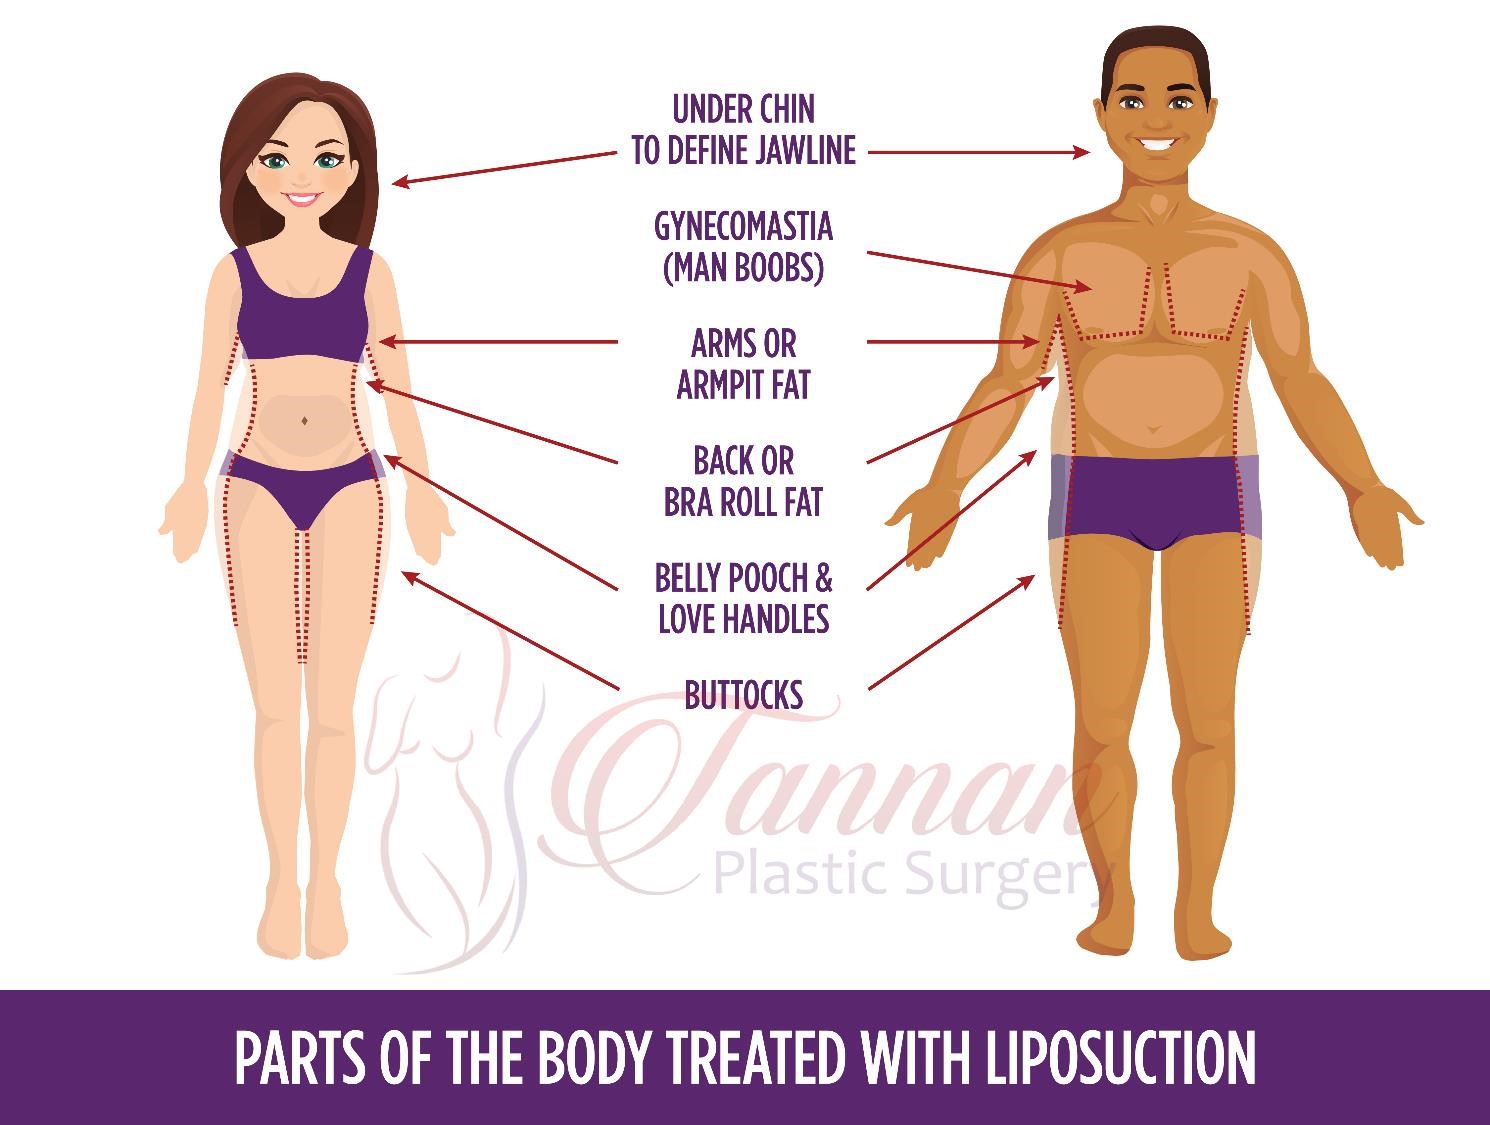 Which Parts of the Body Can Be Treated with Liposuction